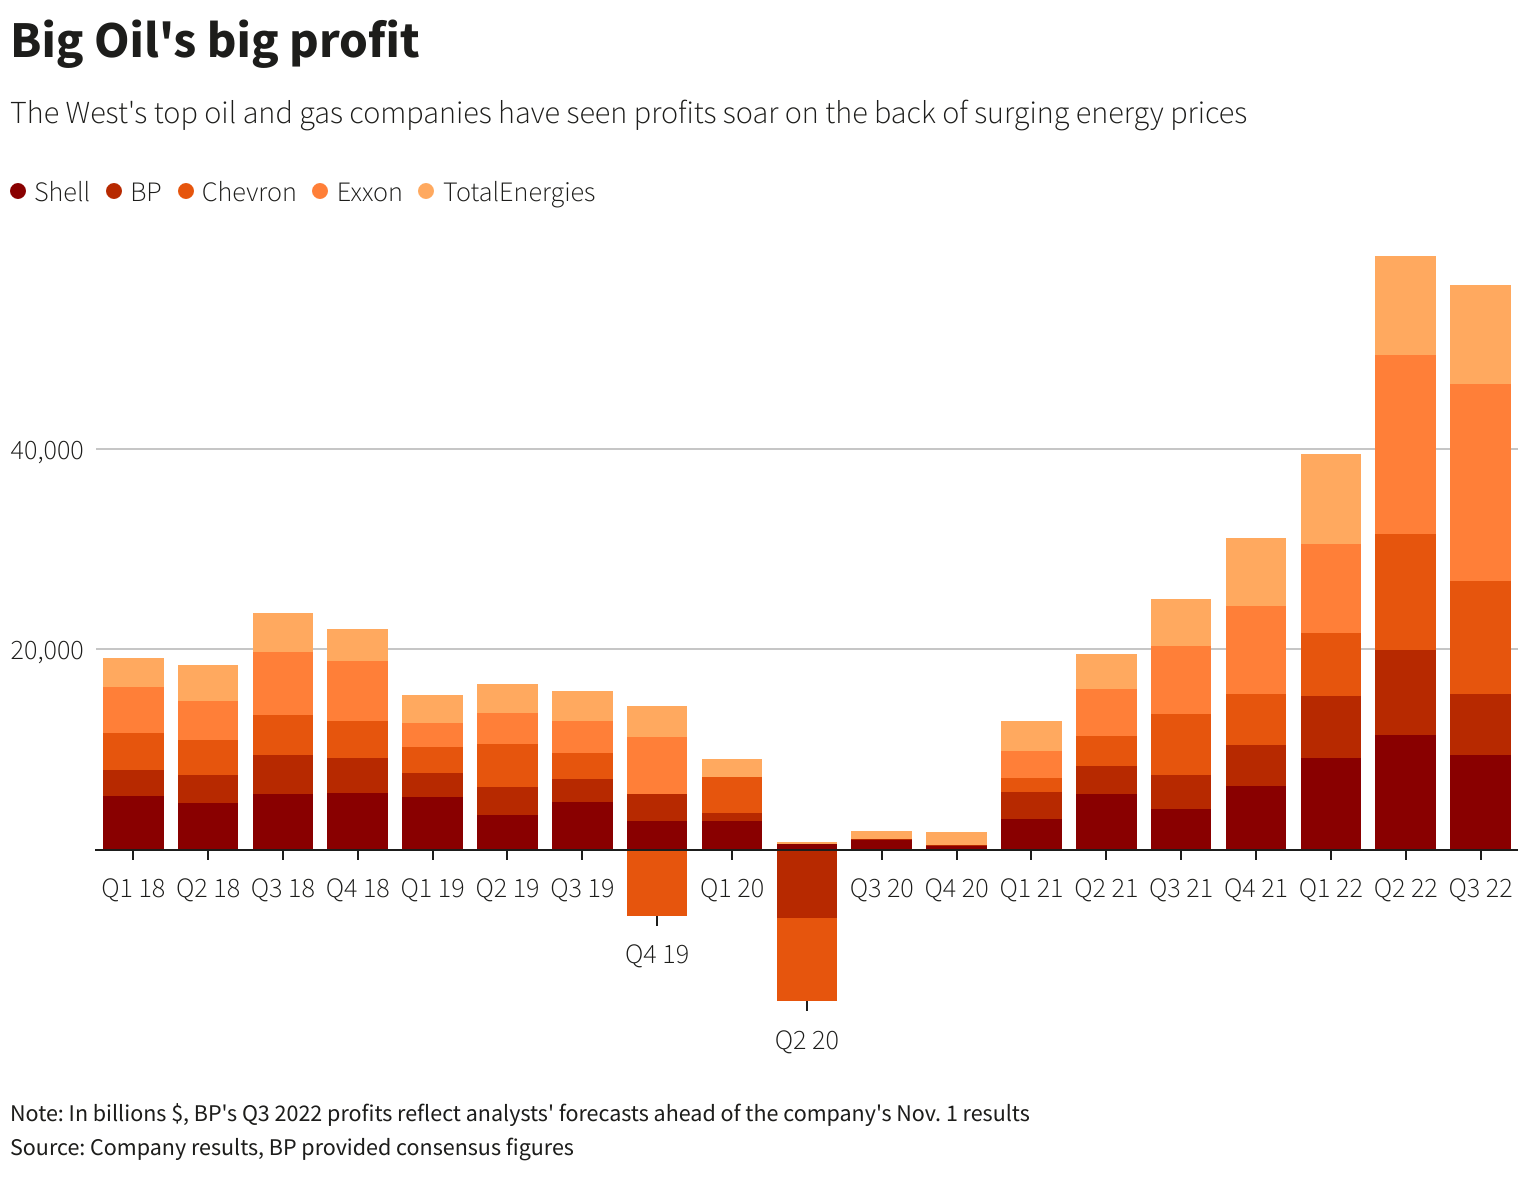 Quarterly profits of five major oil companies in the West, 2018-2022 in billions of U.S. dollars. Data for Shell, BP, Chevron, Exxon, and Total Energies are shown. In Q3 2022, global energy giants including Exxon Mobil Corp (XOM.N) and Chevron Corp (CVX.N) posted another round of huge quarterly profits, benefiting from surging natural gas and fuel prices that have boosted inflation around the world and led to fresh calls to further tax the sector. Four of the five largest global oil companies have now reported results, combining for nearly $50 billion in net income, lifted by tight global markets and disruption following Moscow’s invasion of Ukraine. Graphic: Reuters